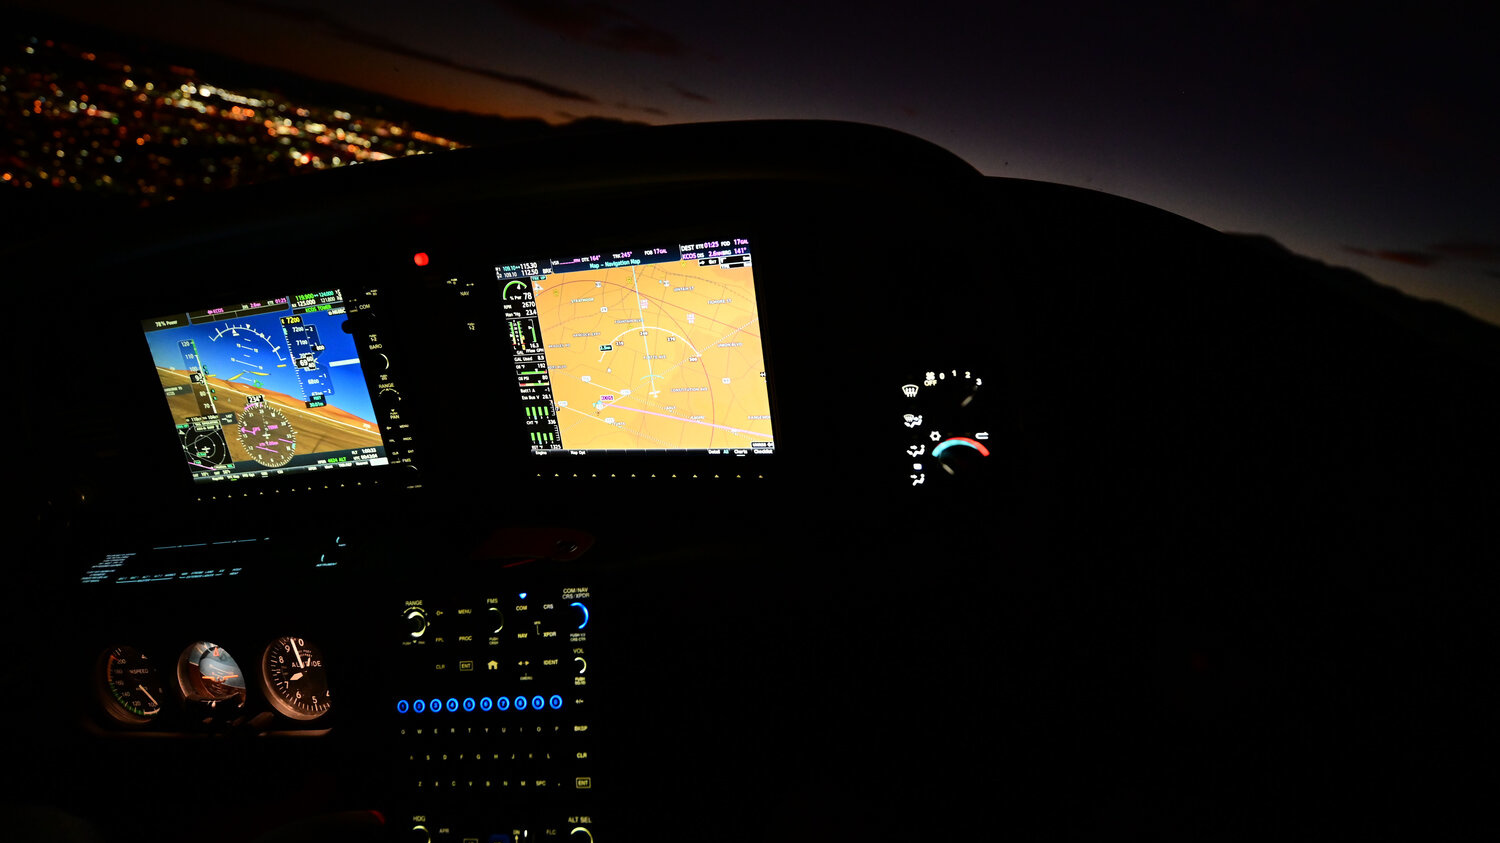 Garmin Perspective+ avionics feature a full QWERTY keyboard on the FMS for a quick and natural data entry